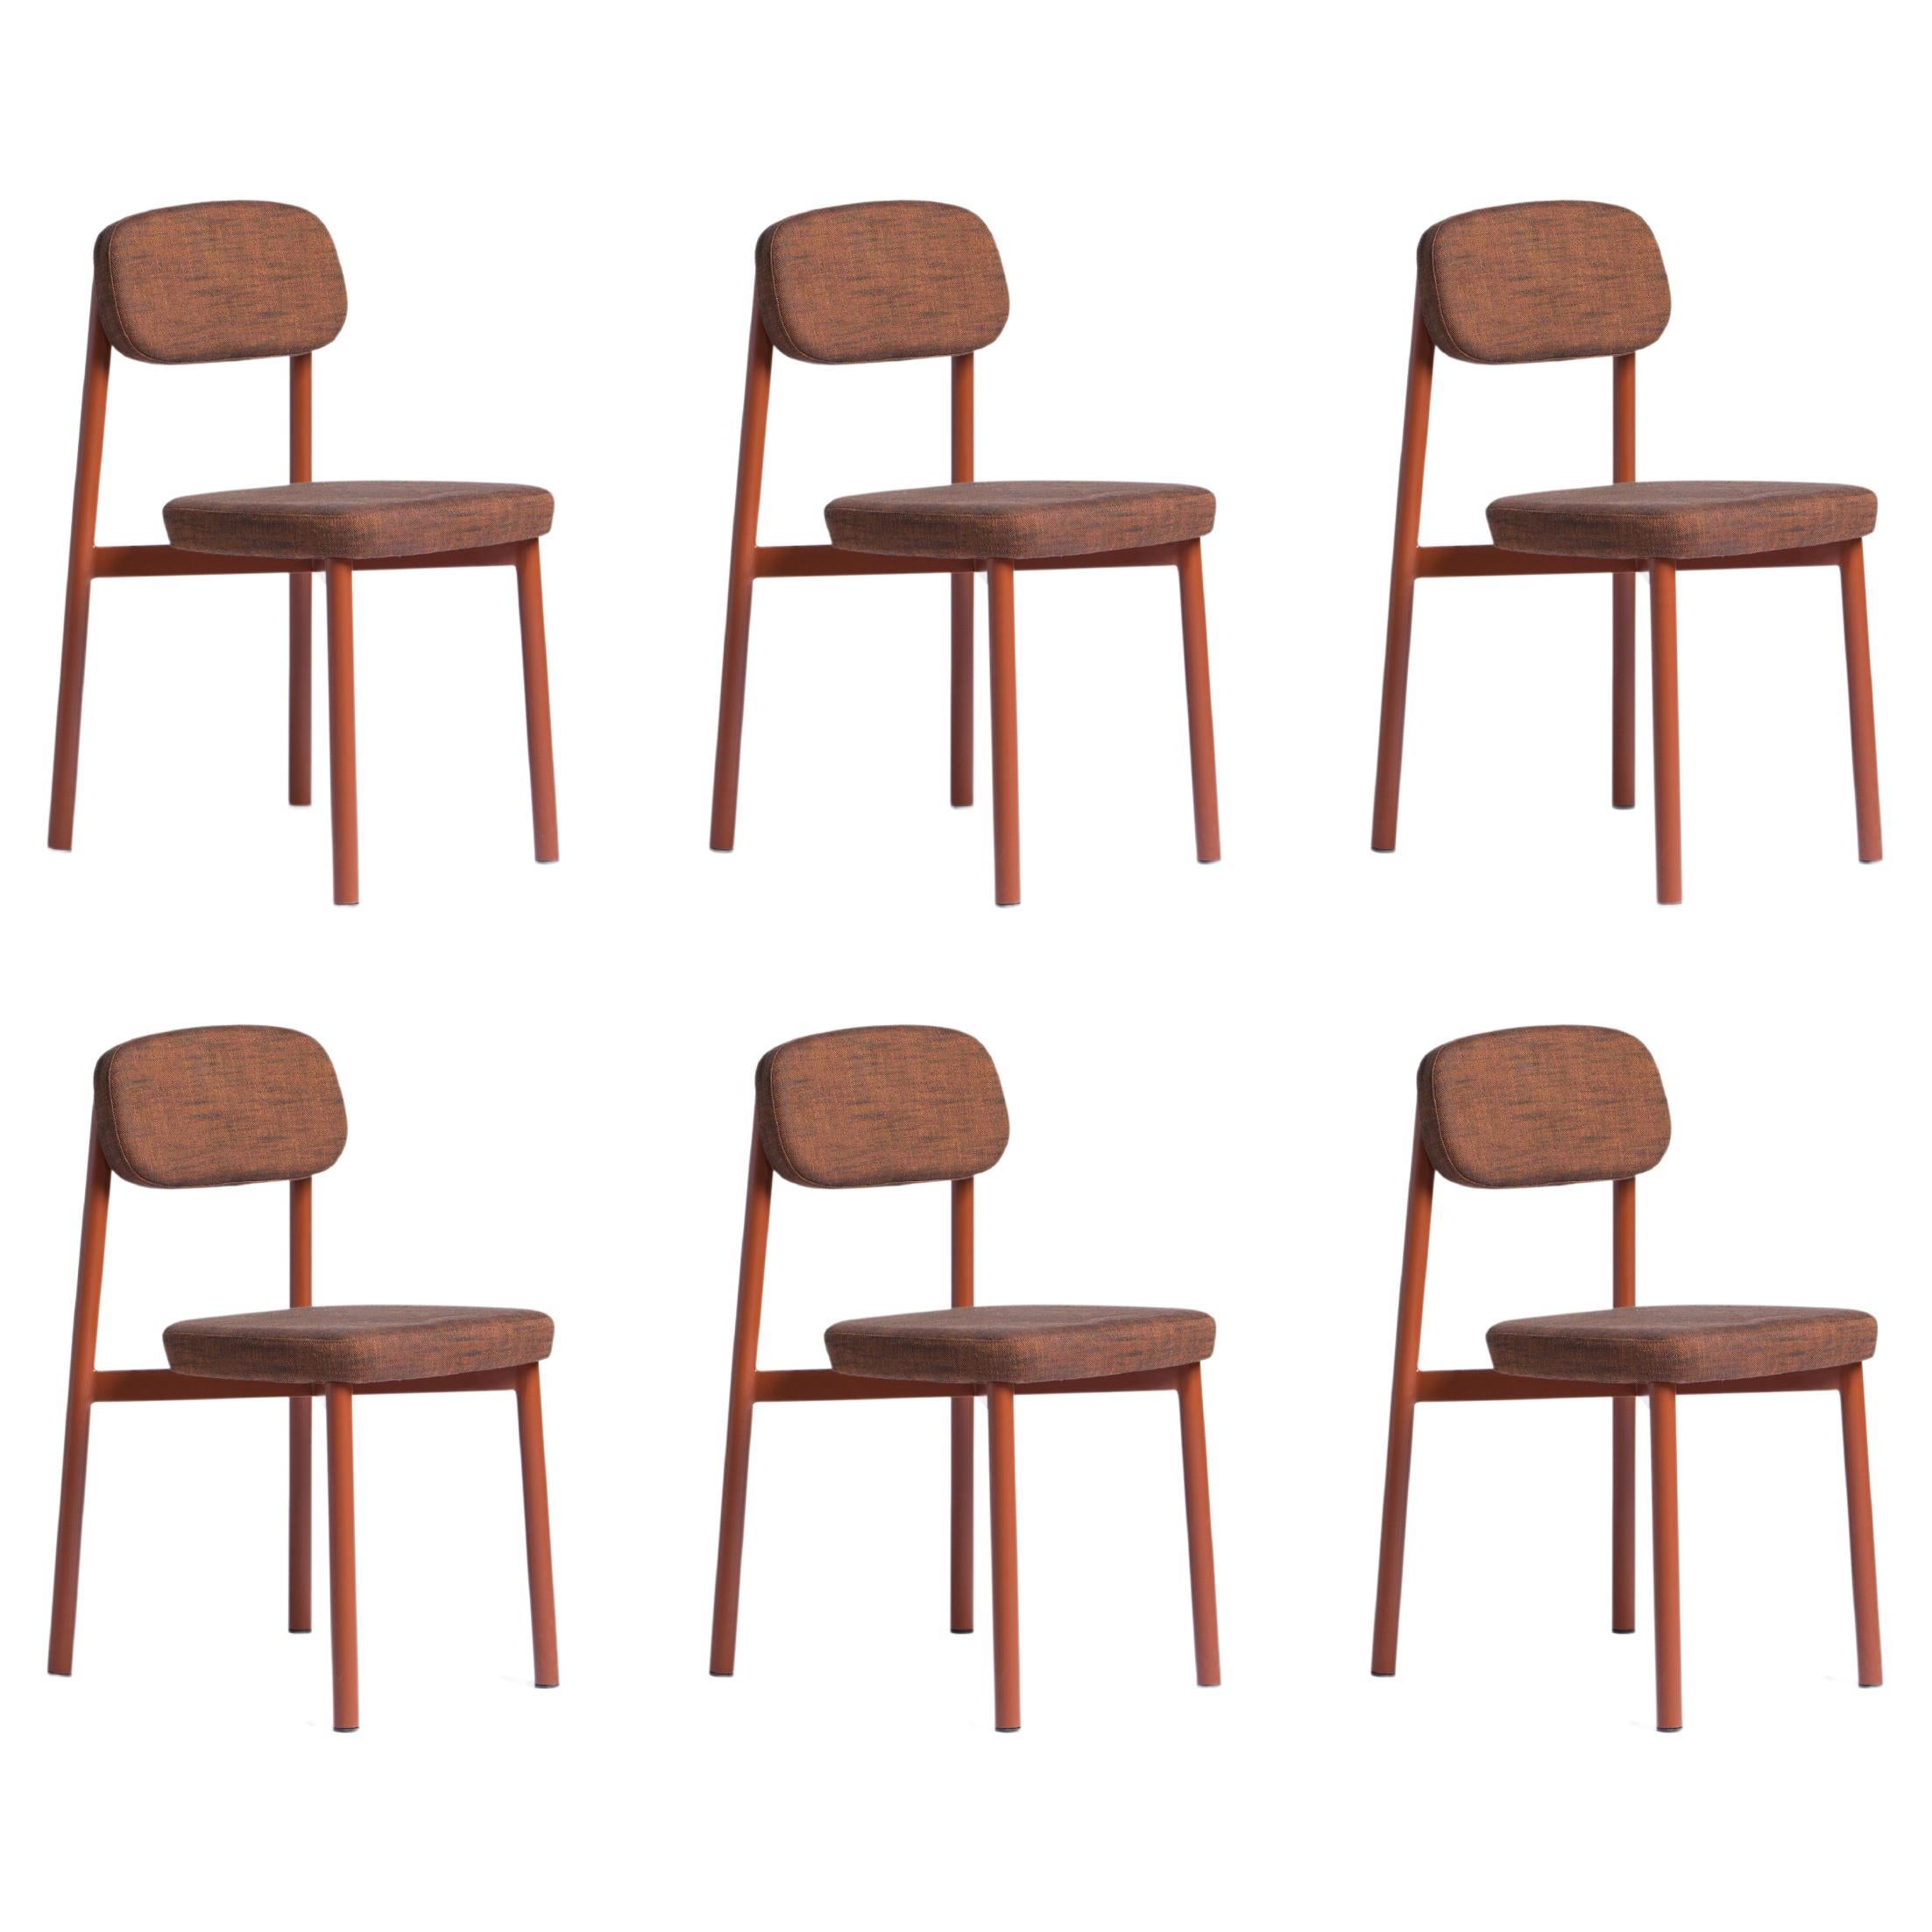 Set of 6 Brick Red Residence Chairs by Kann Design For Sale